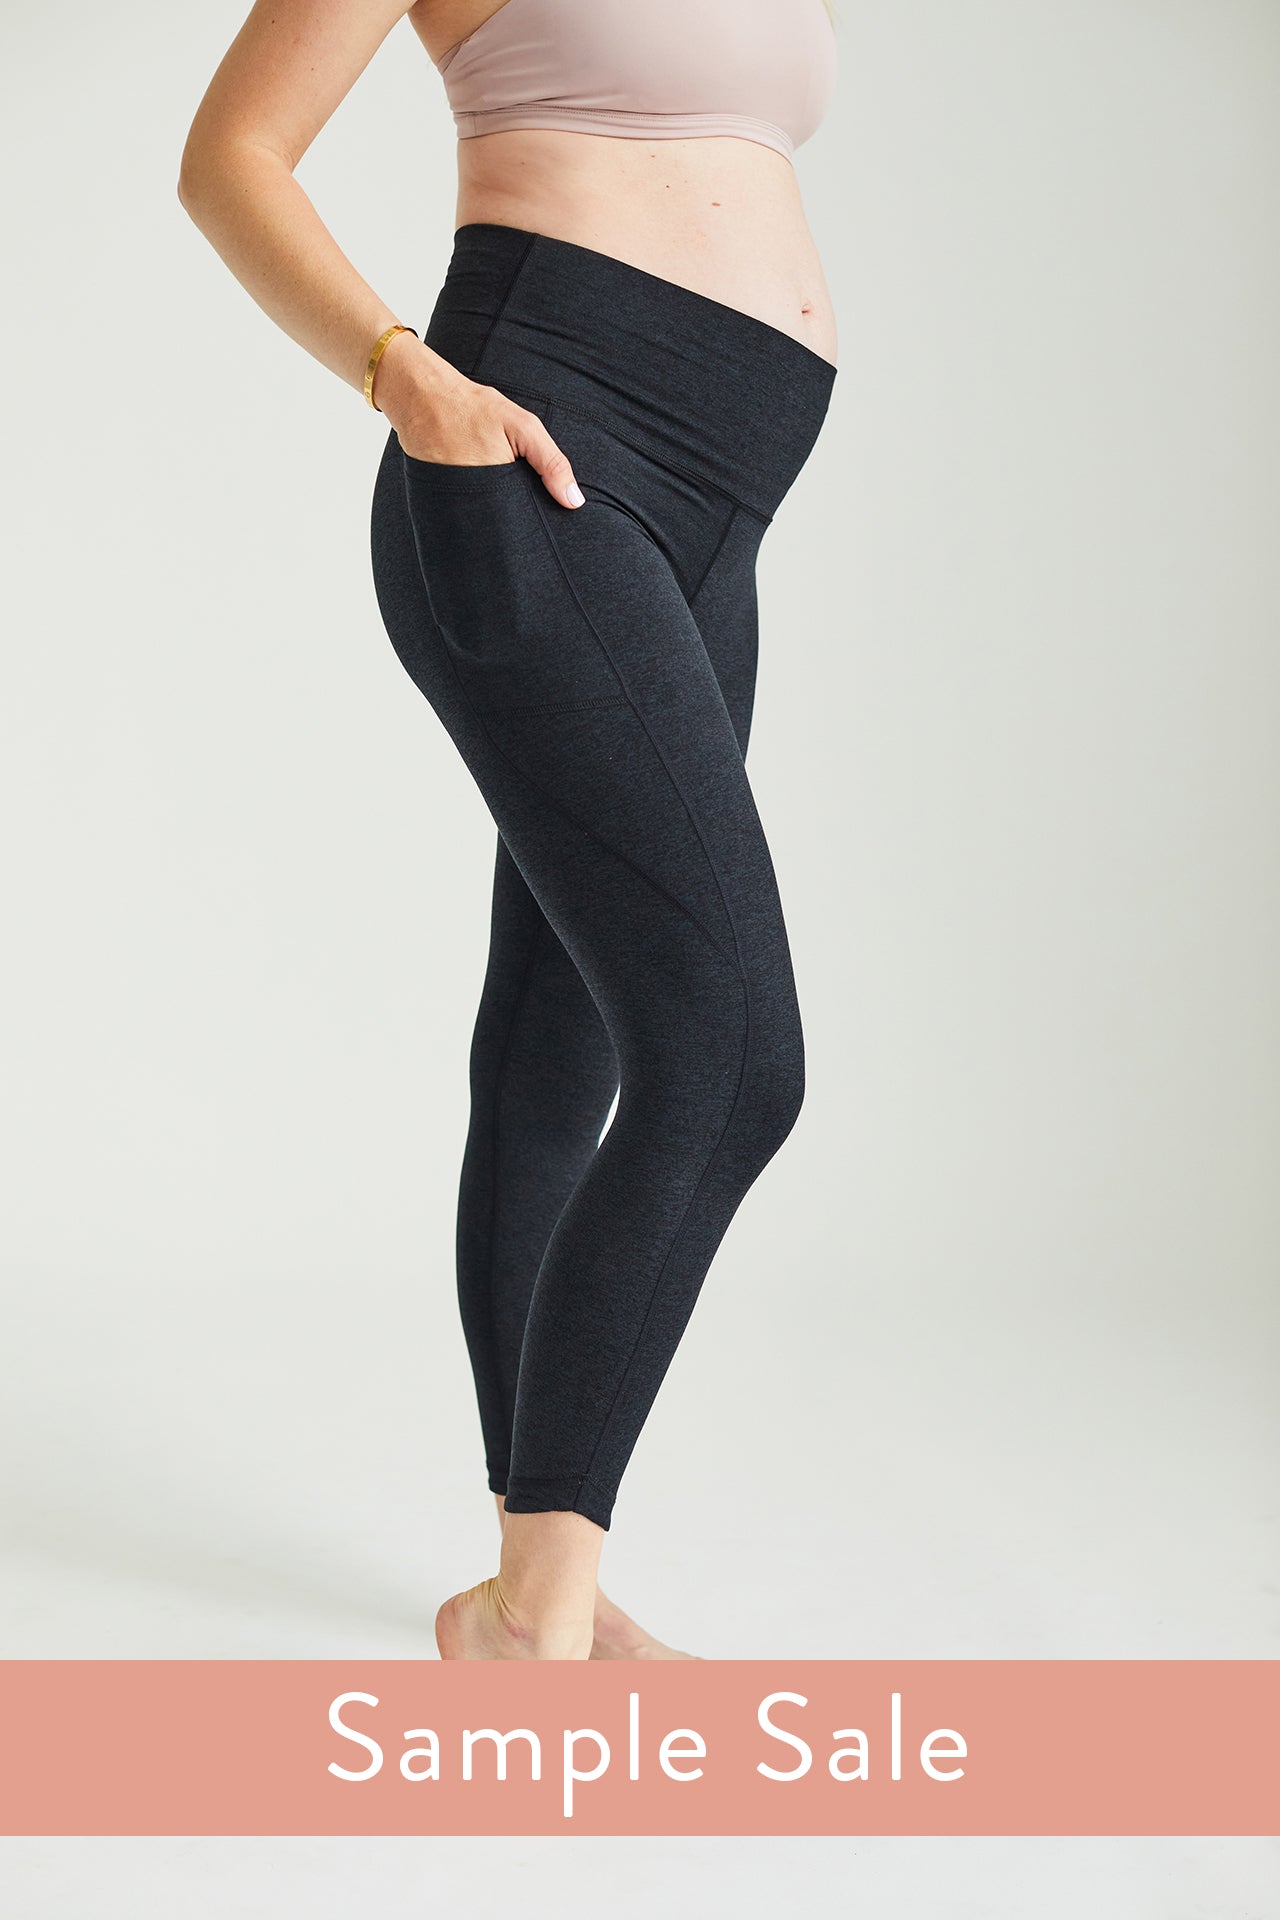 Maternity Jogger Pants for Active and Comfort-Seeking Moms – Anook